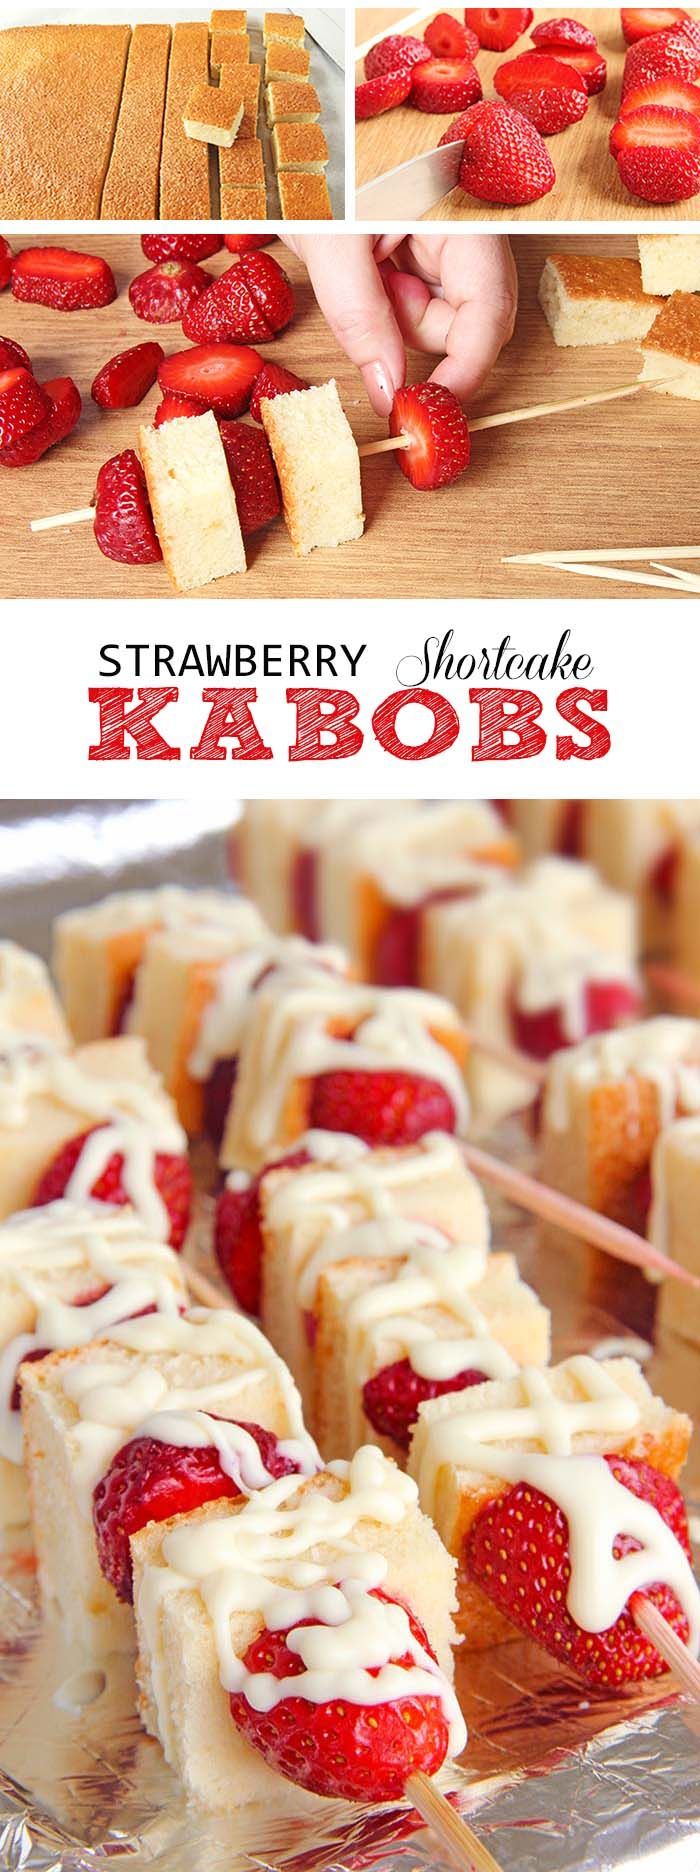 This strawberry Shortcake kabobs are your ticket to becoming a backyard-barbecue legend, perfect for 4th o